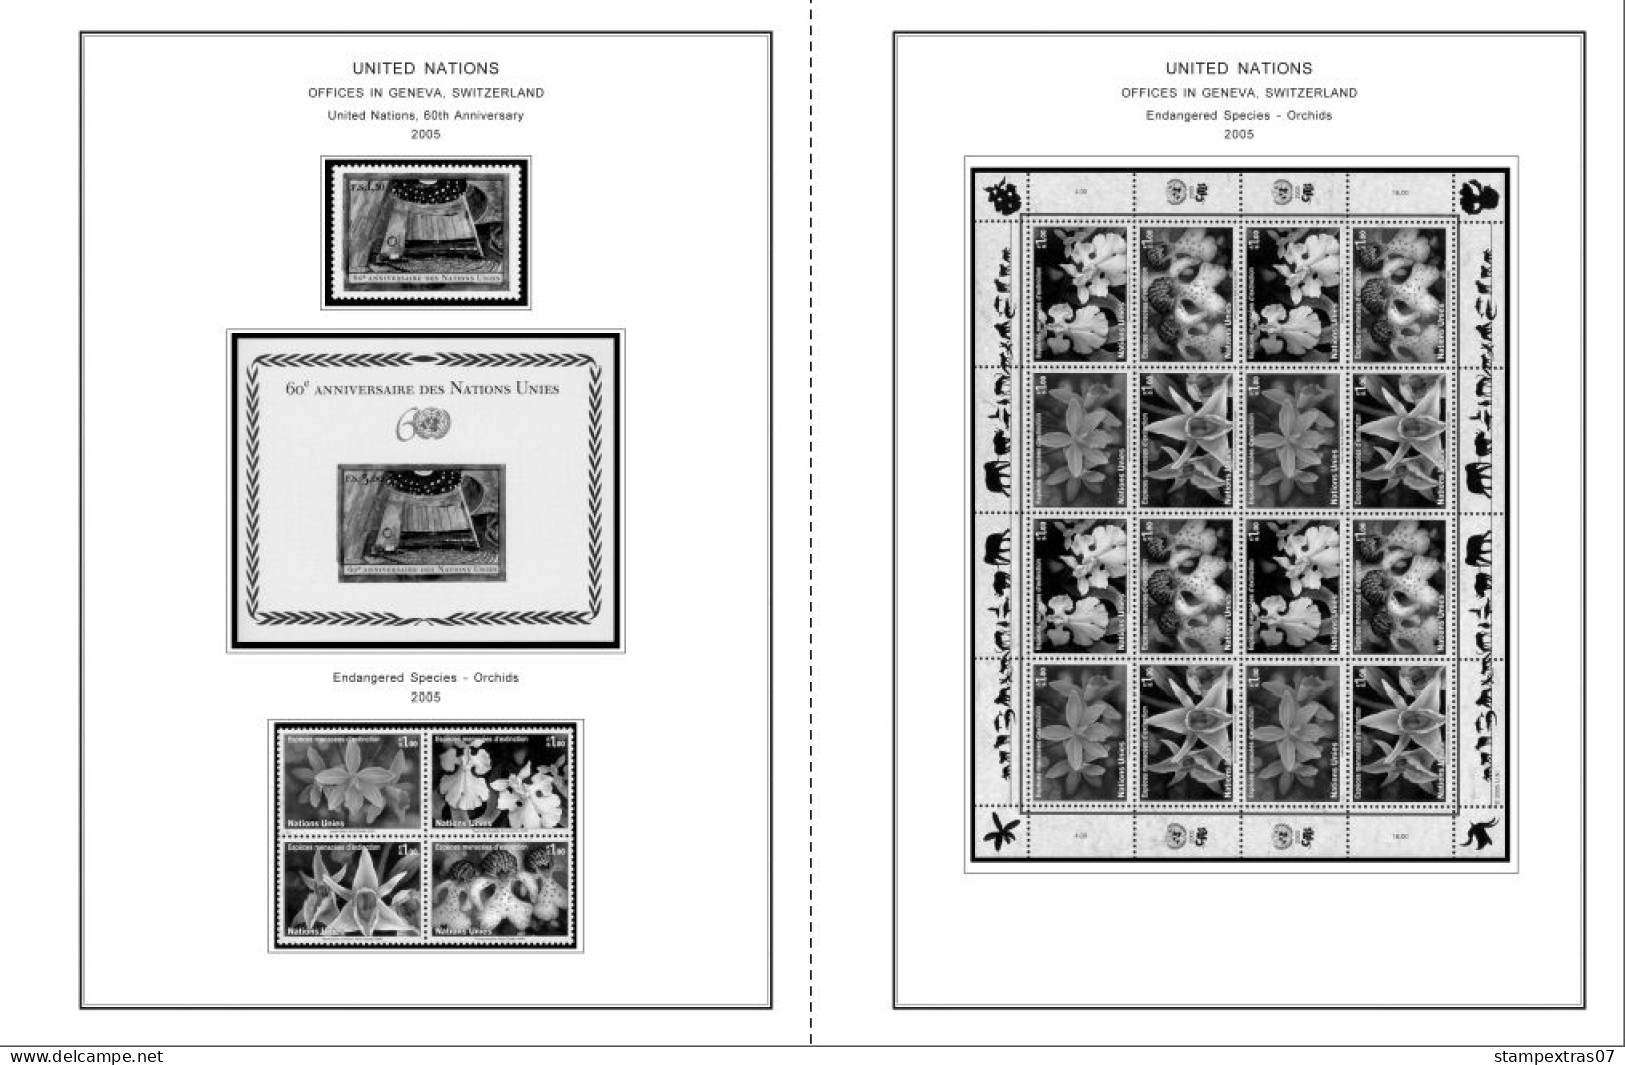 UNITED NATIONS - GENEVA 1969-2020 STAMP ALBUM PAGES (166 b&w illustrated pages)